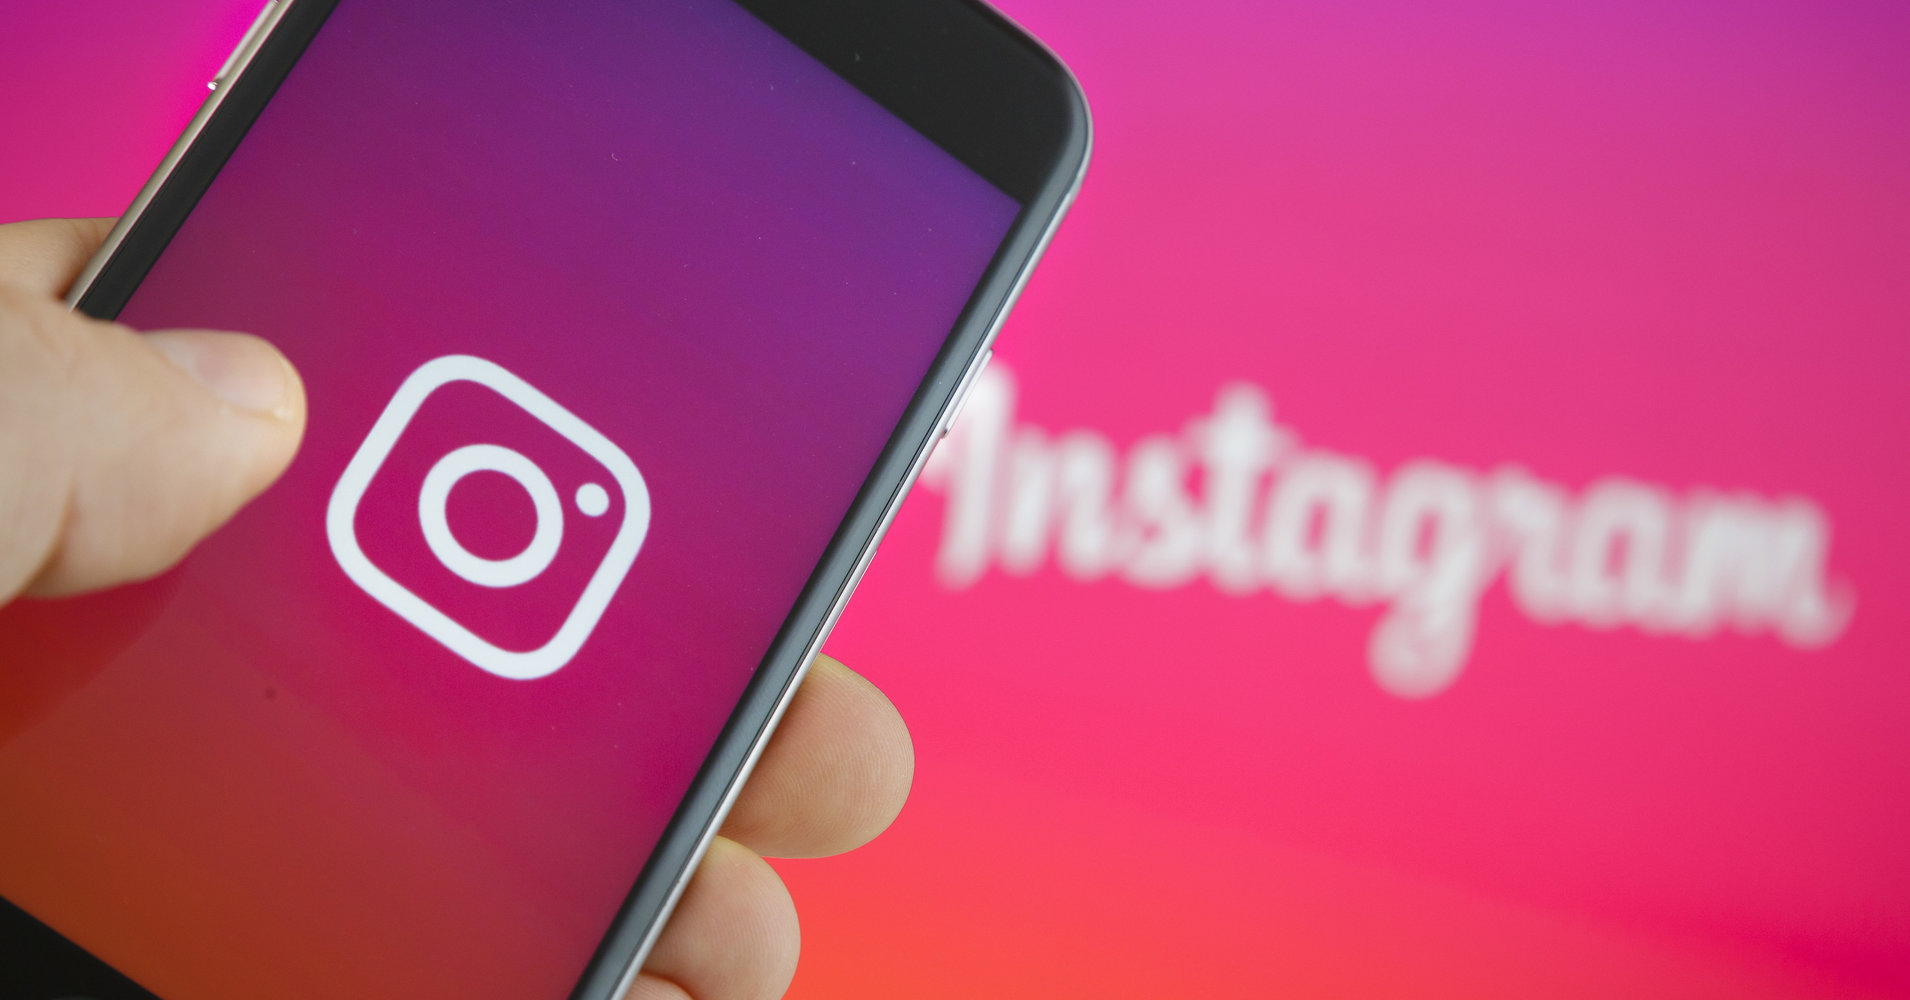 How to Get Paid on Instagram